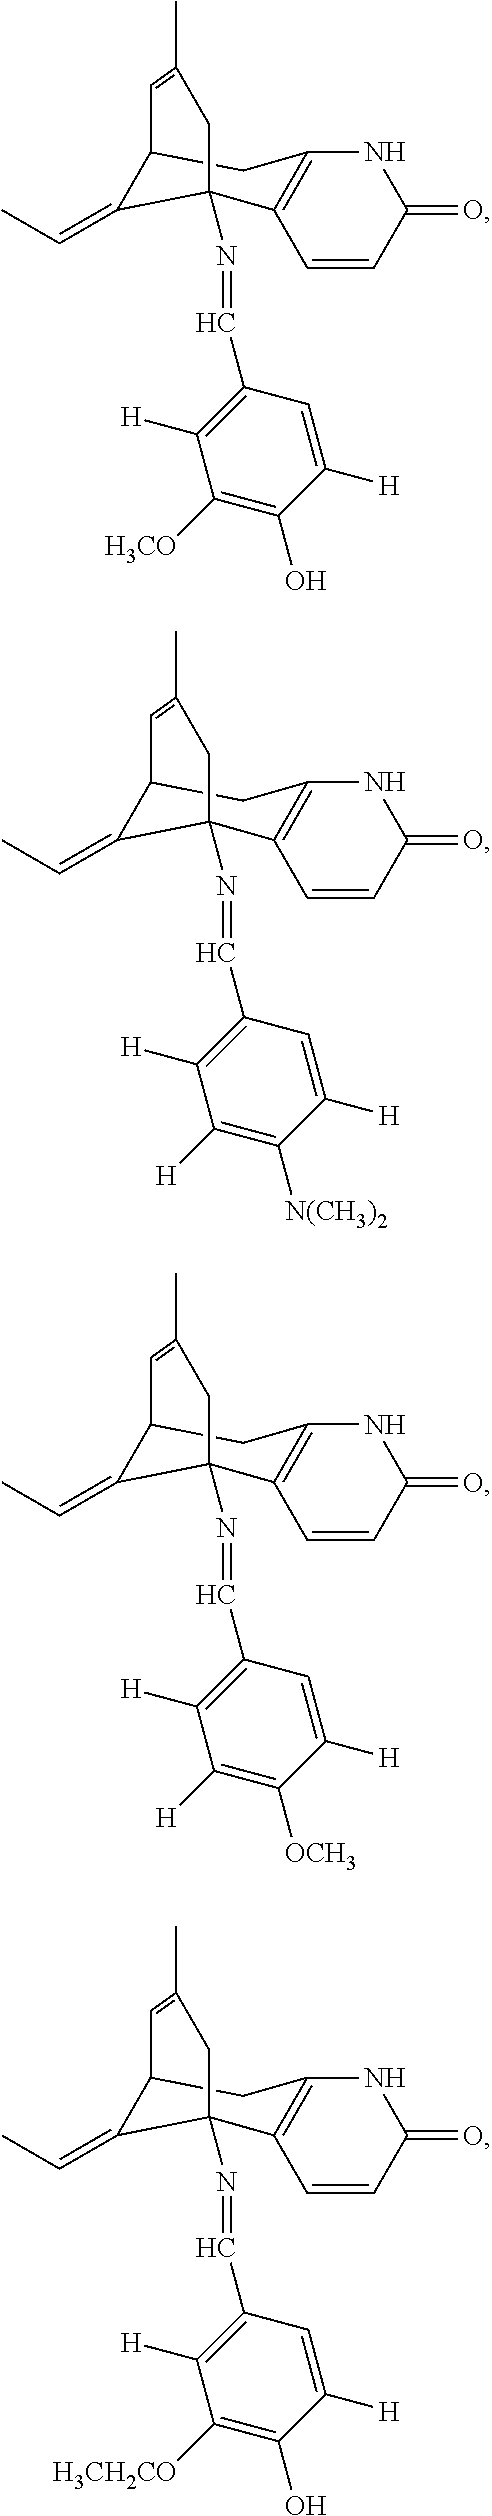 Acetylcholinesterase inhibitor composition for sexual use